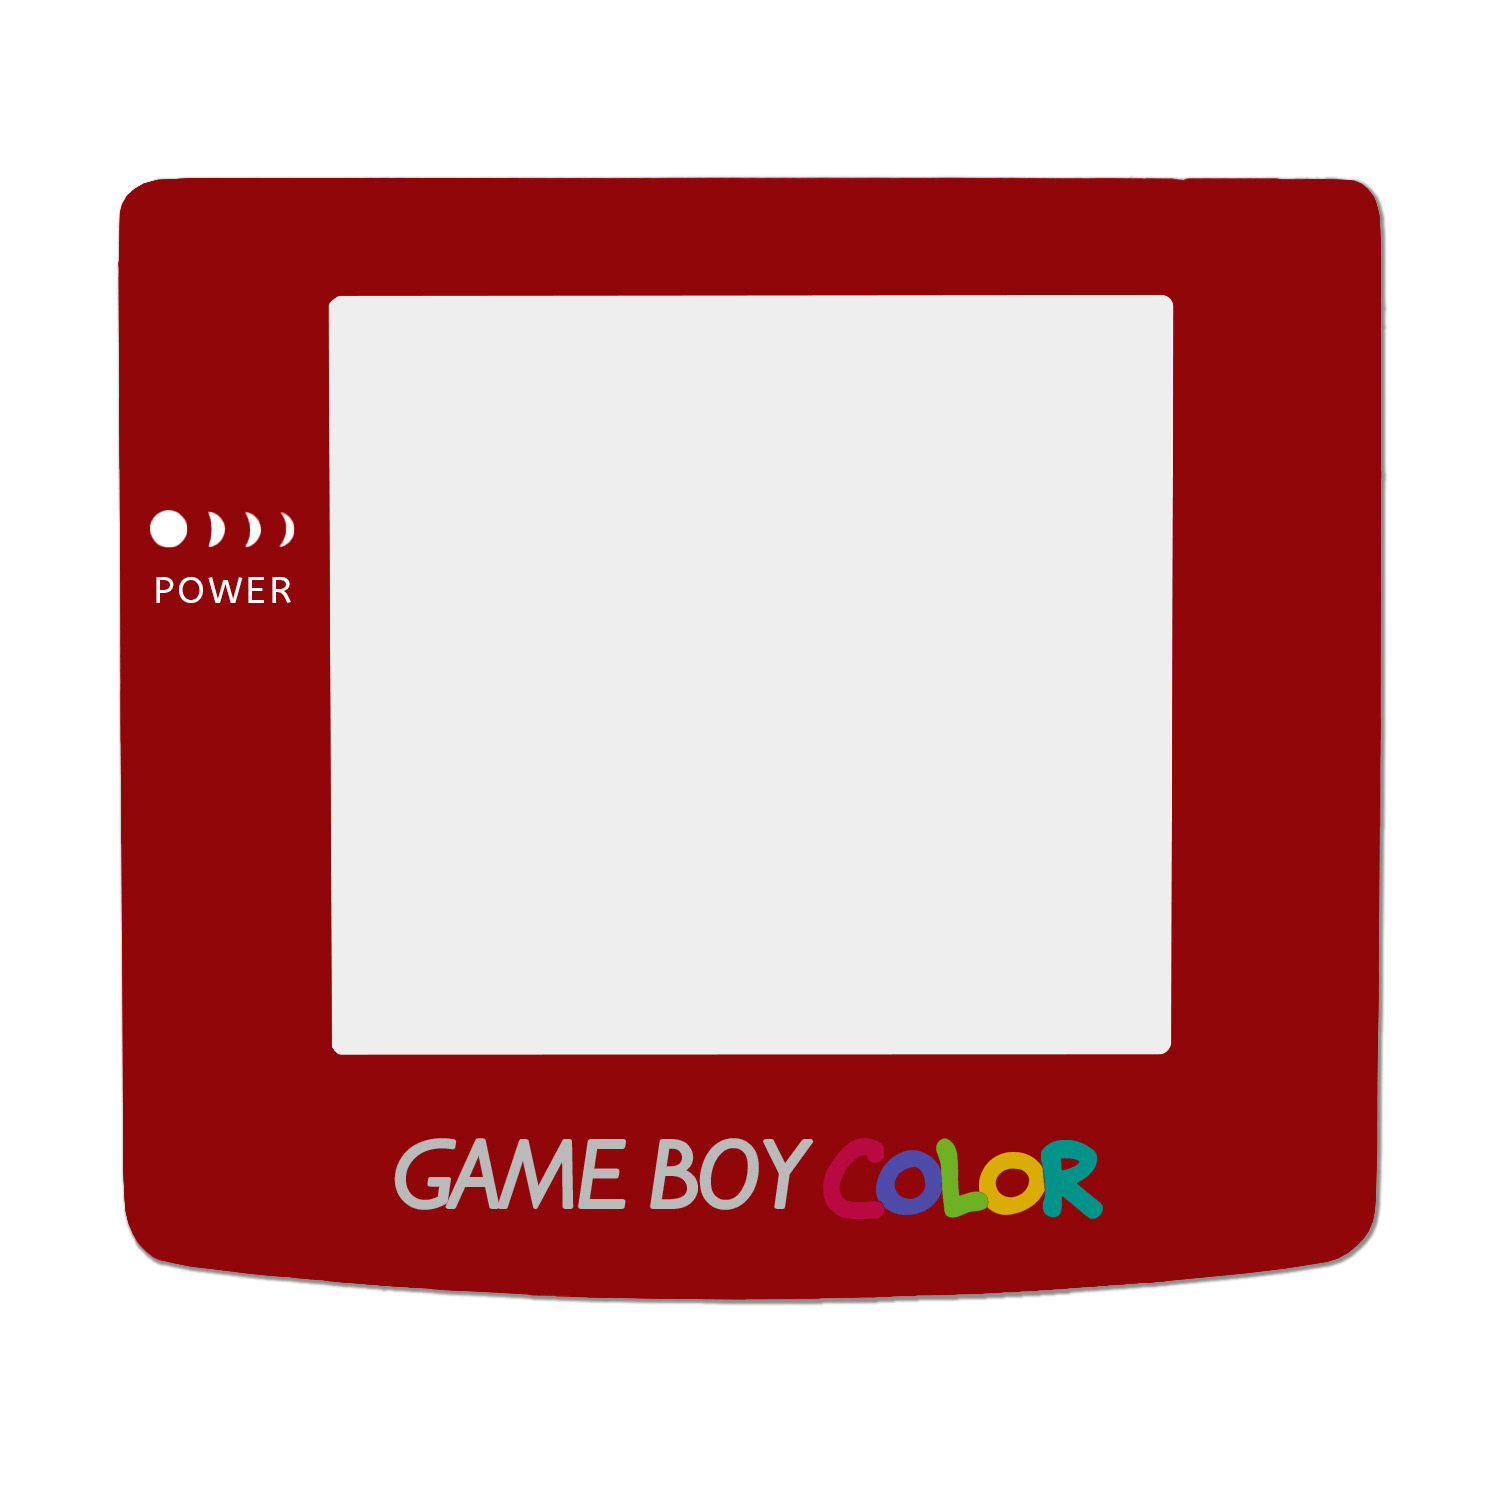 Game Boy Color Display Disc (Red)